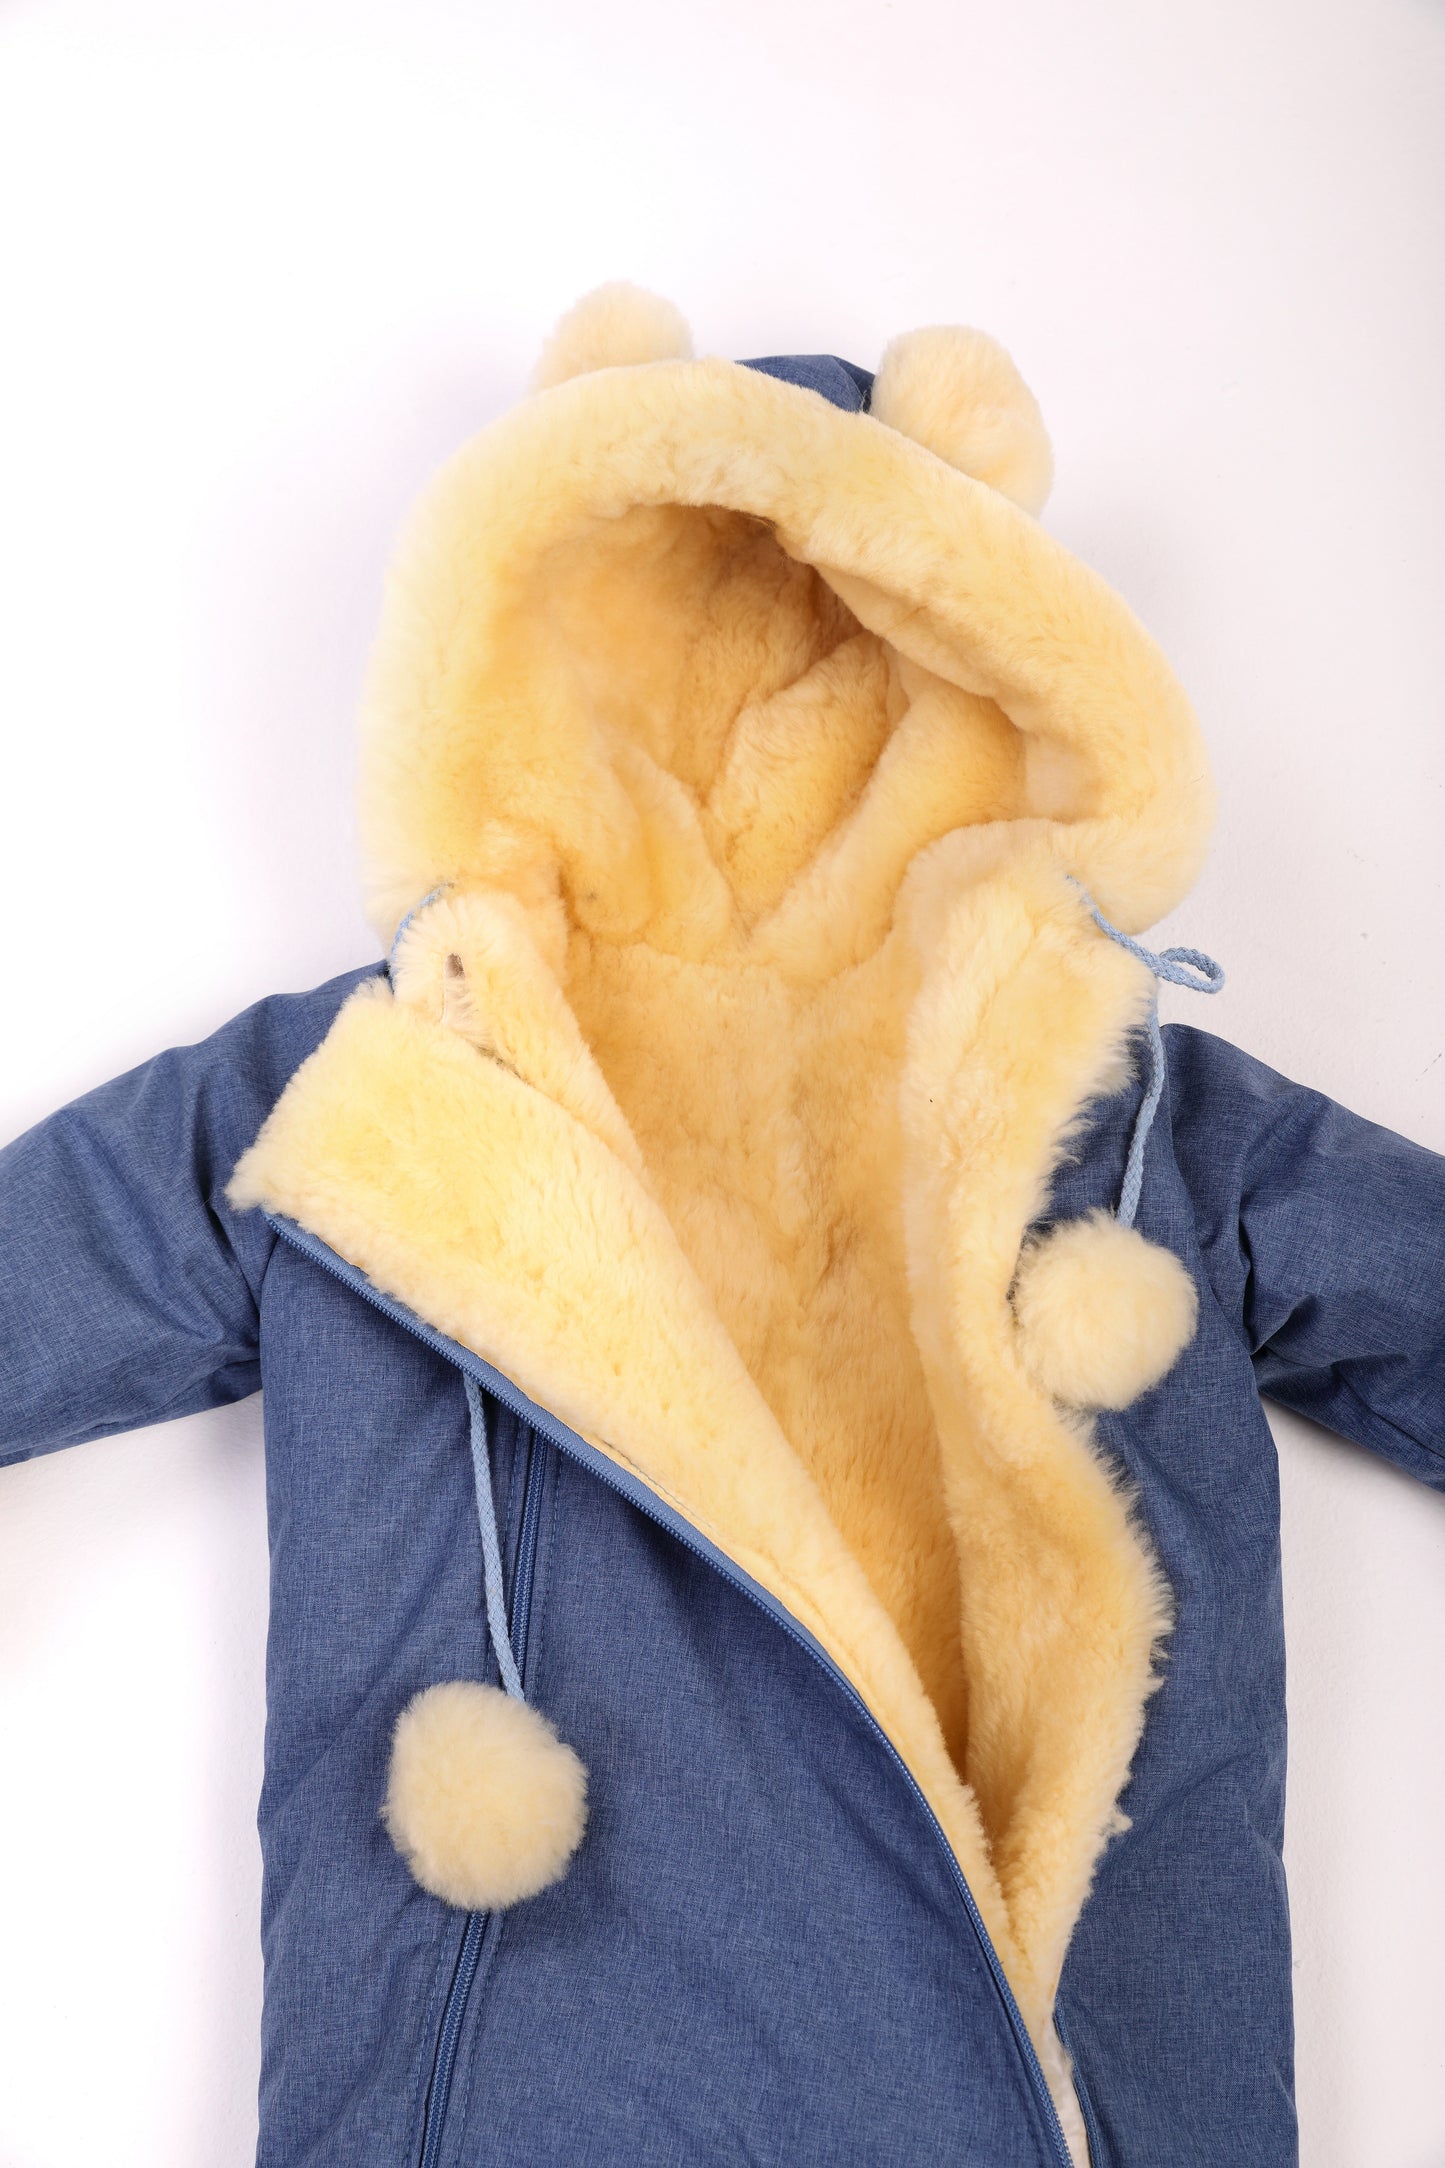 Genuine Sheepskin Winter Baby Fur Hooded Warm Jumpsuit with Fur Trims in Blue Color